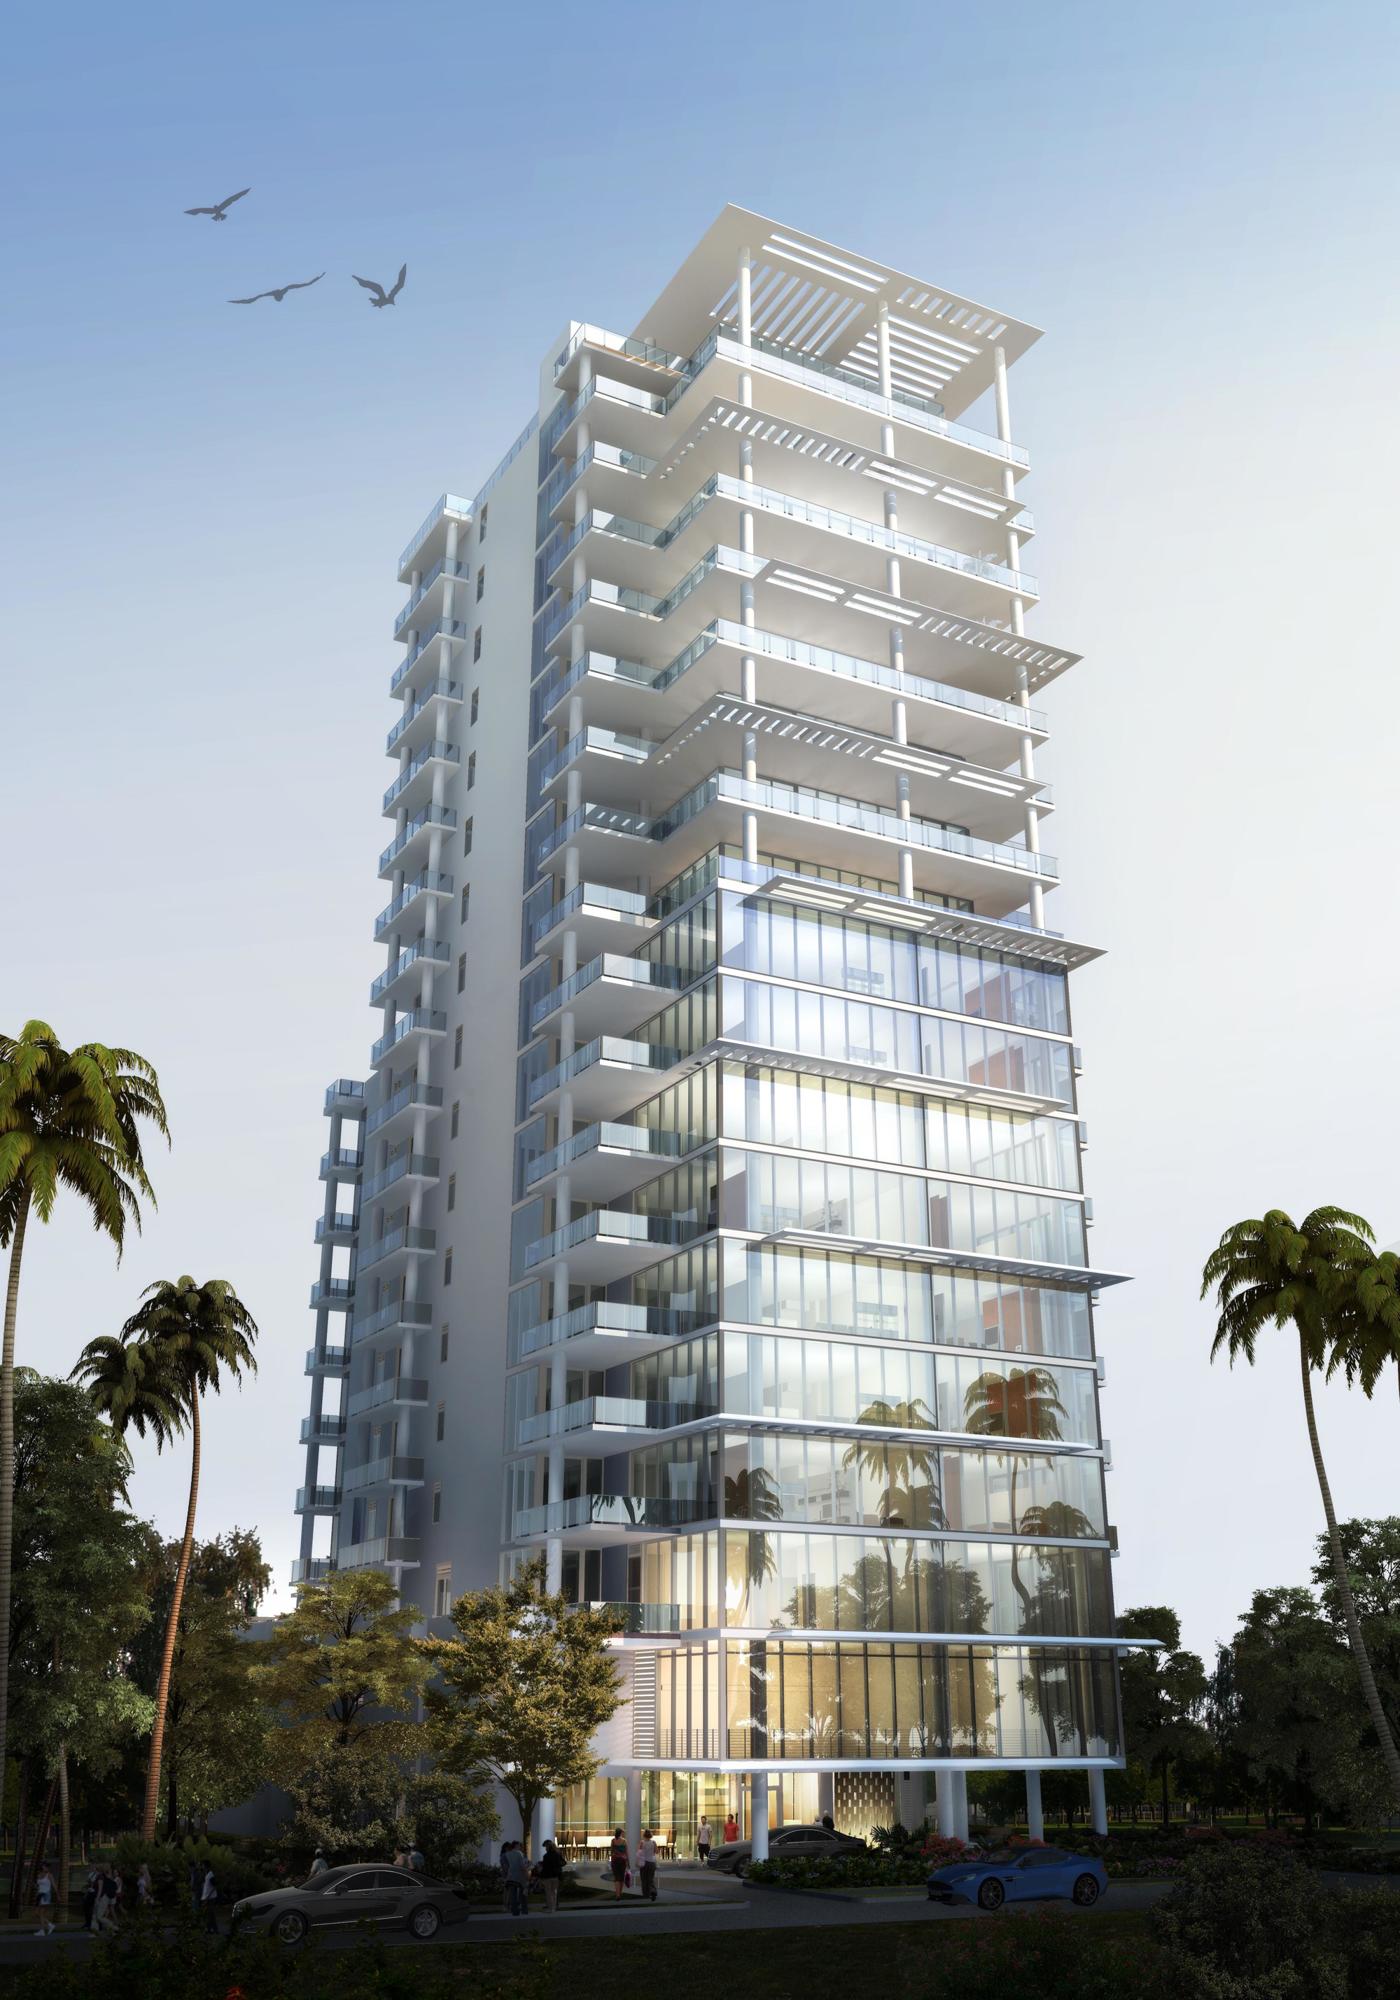 COURTESY RENDERING — The 18-story, 23-unit Epoch is expected to be delivered in early 2021 in downtown Sarasota.